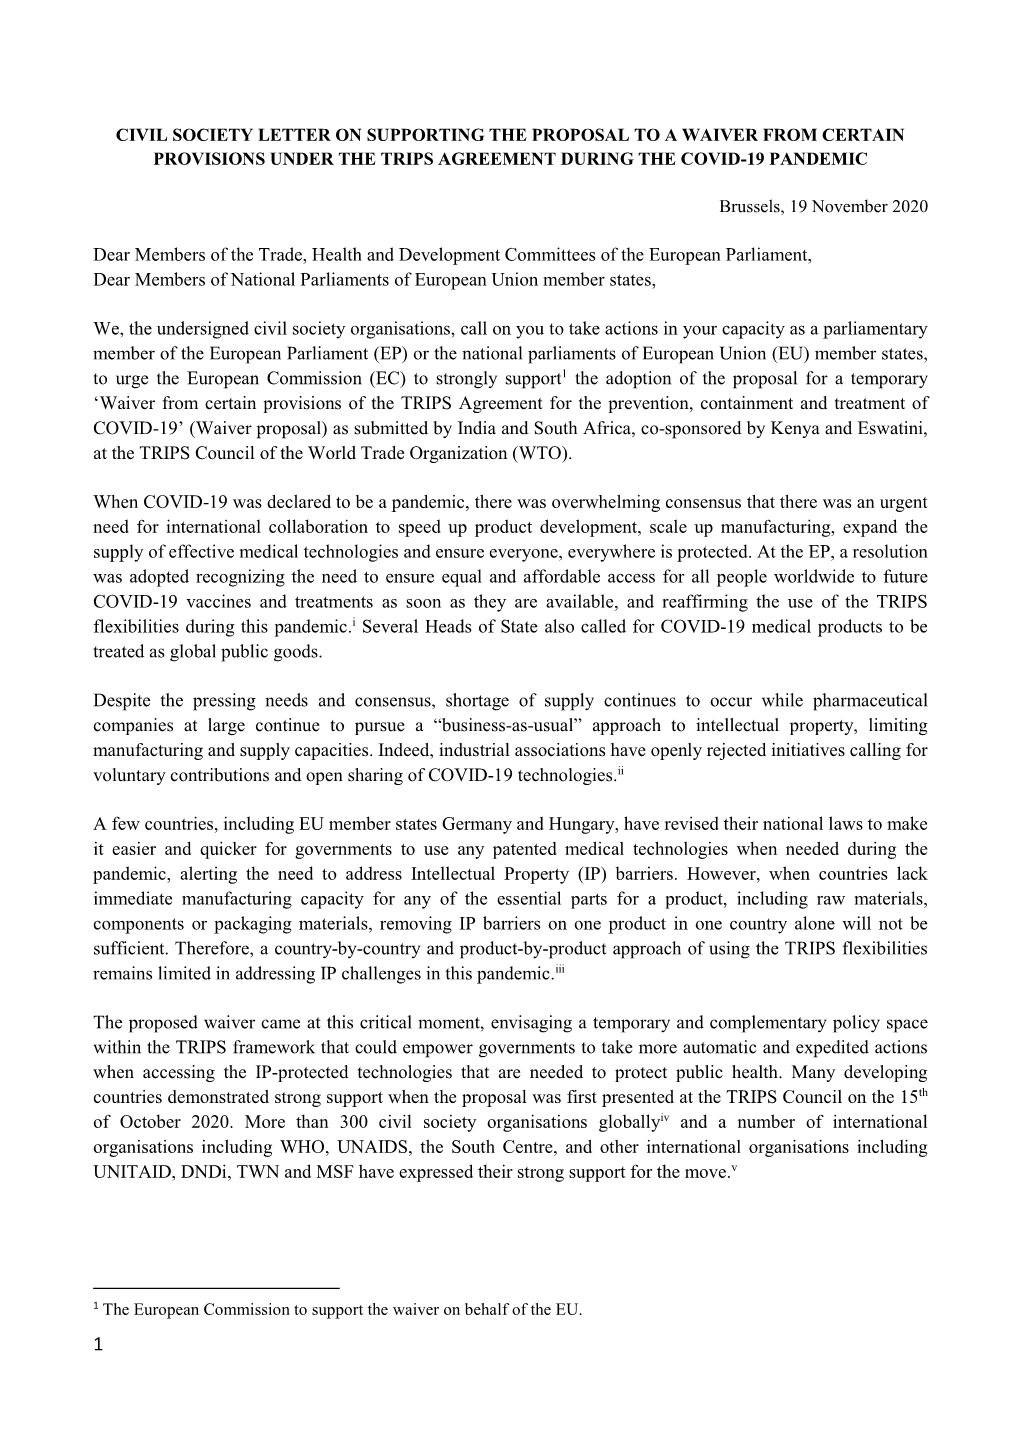 Joint Letter to EP on Covid19 WTO TRIPS Waiver